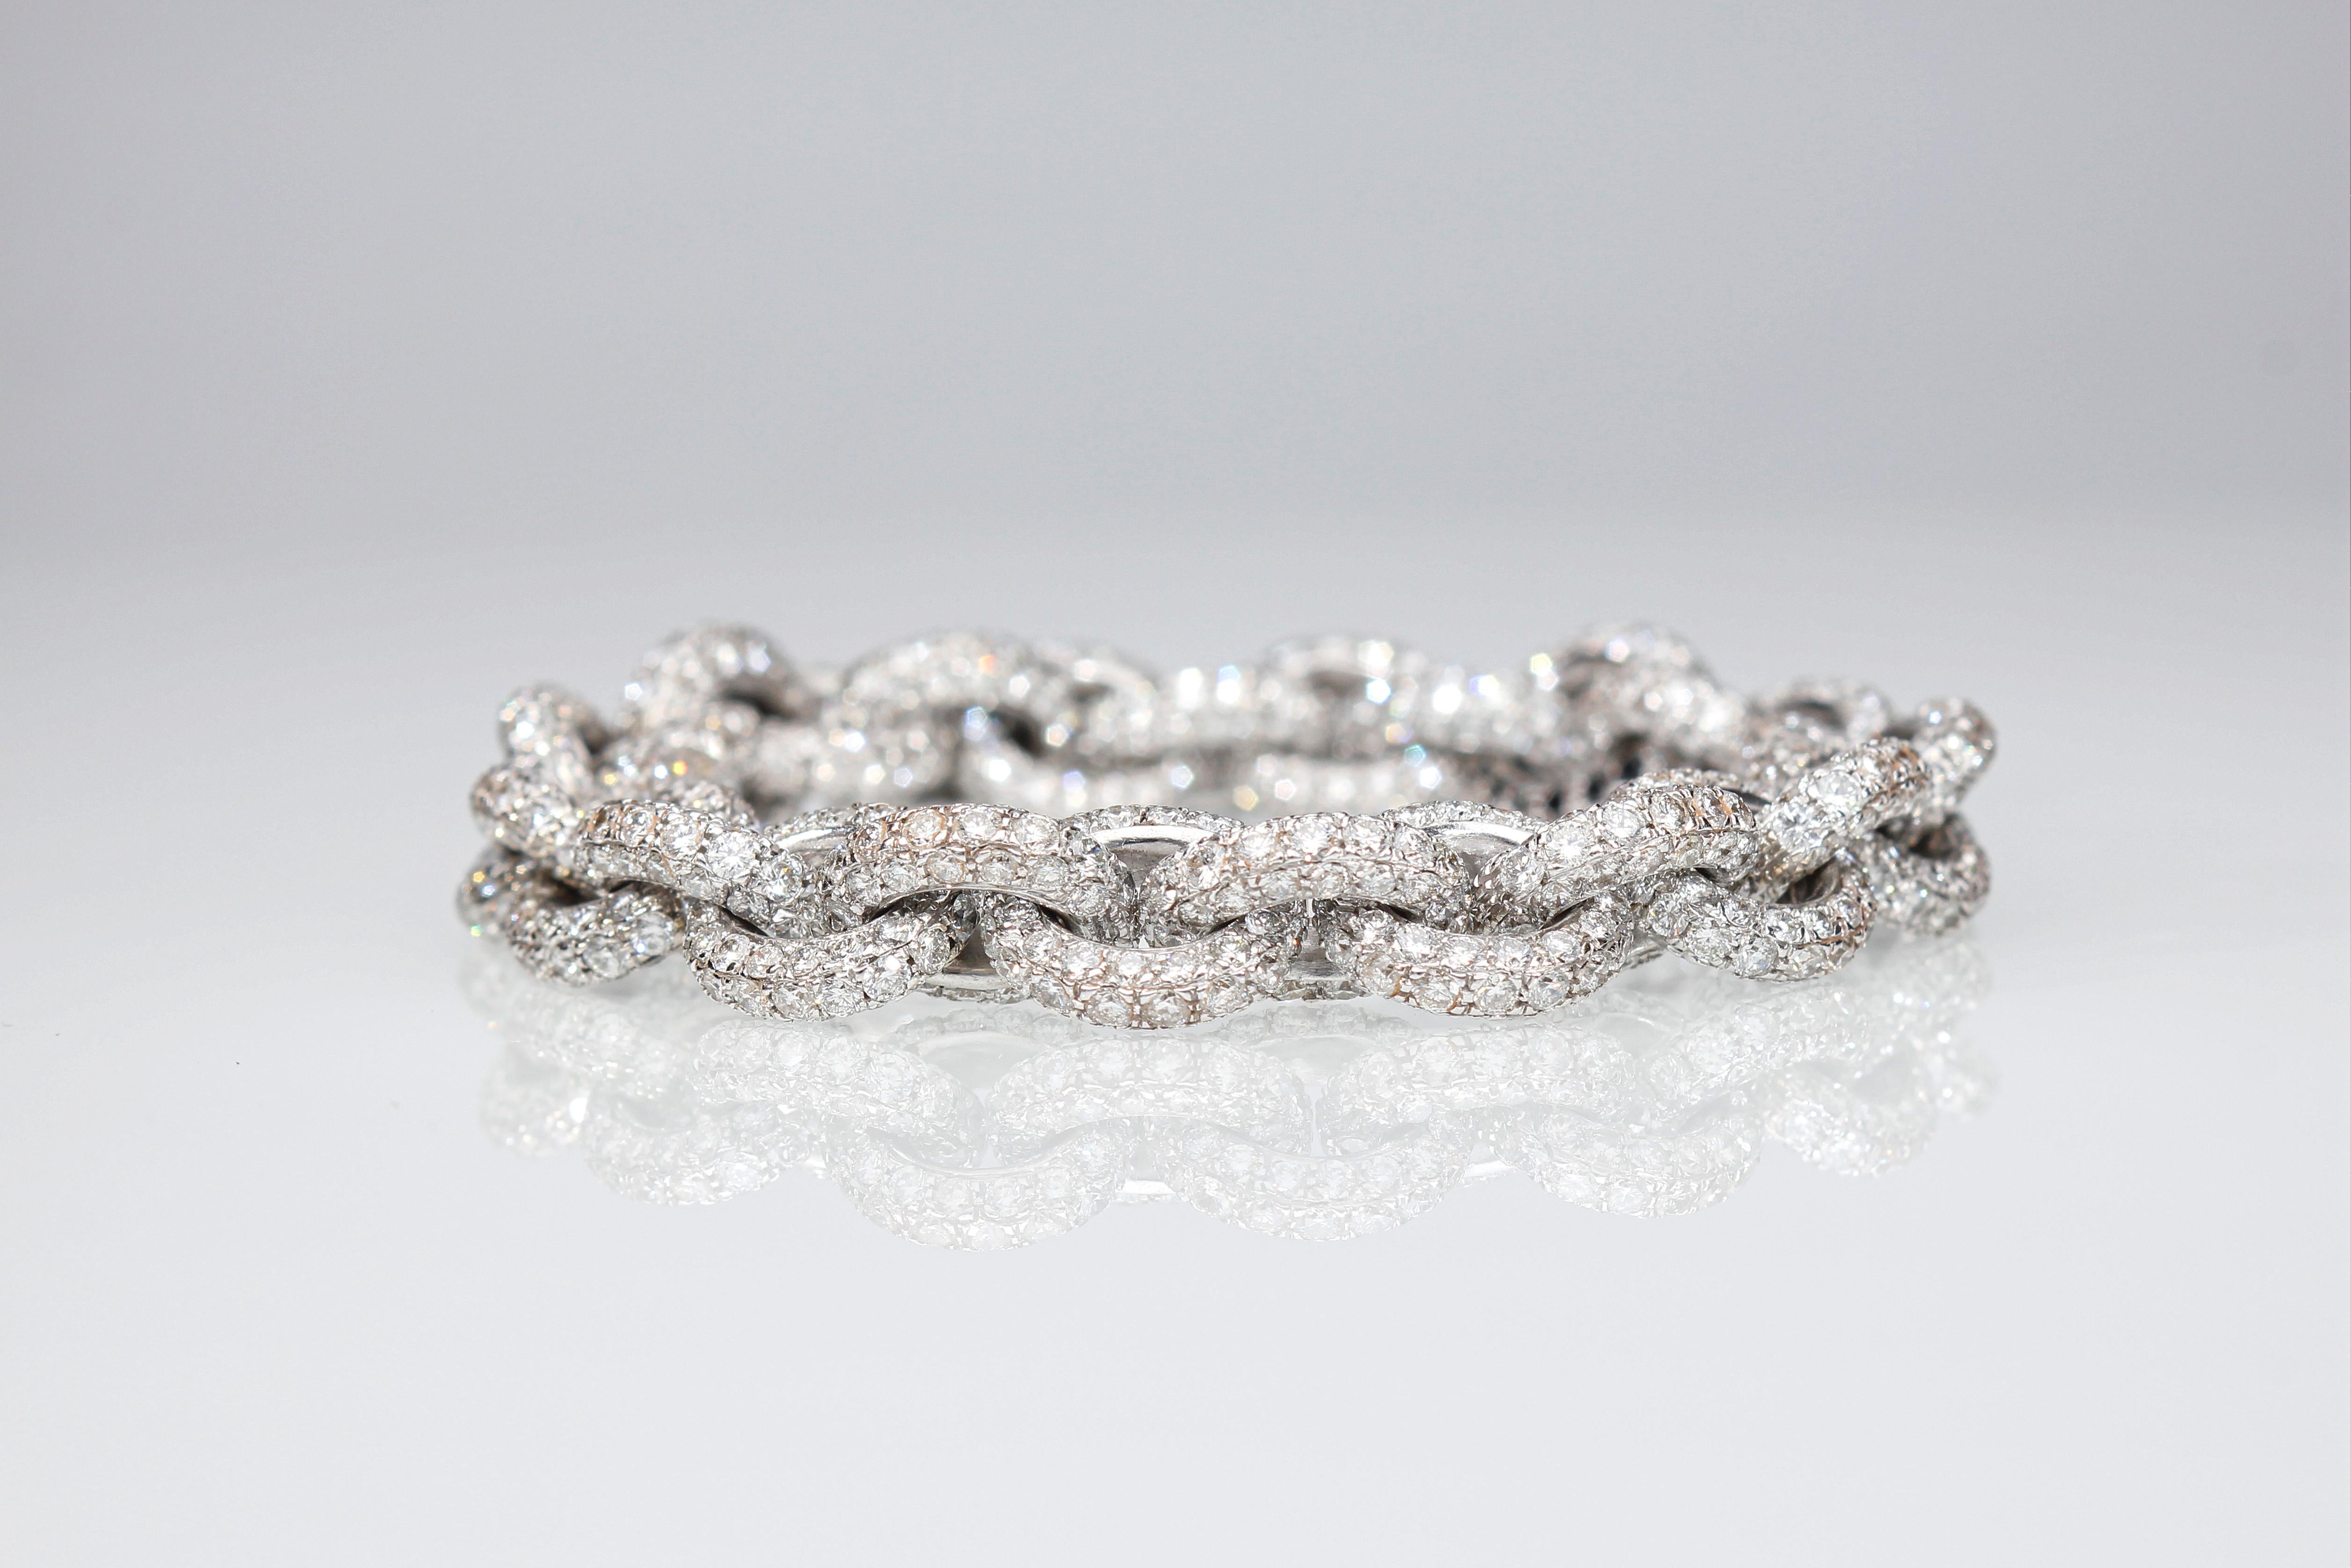 Chain Necklace/Bracelet with 64.26 Ct of White and Black Diamonds. Handmade. For Sale 2